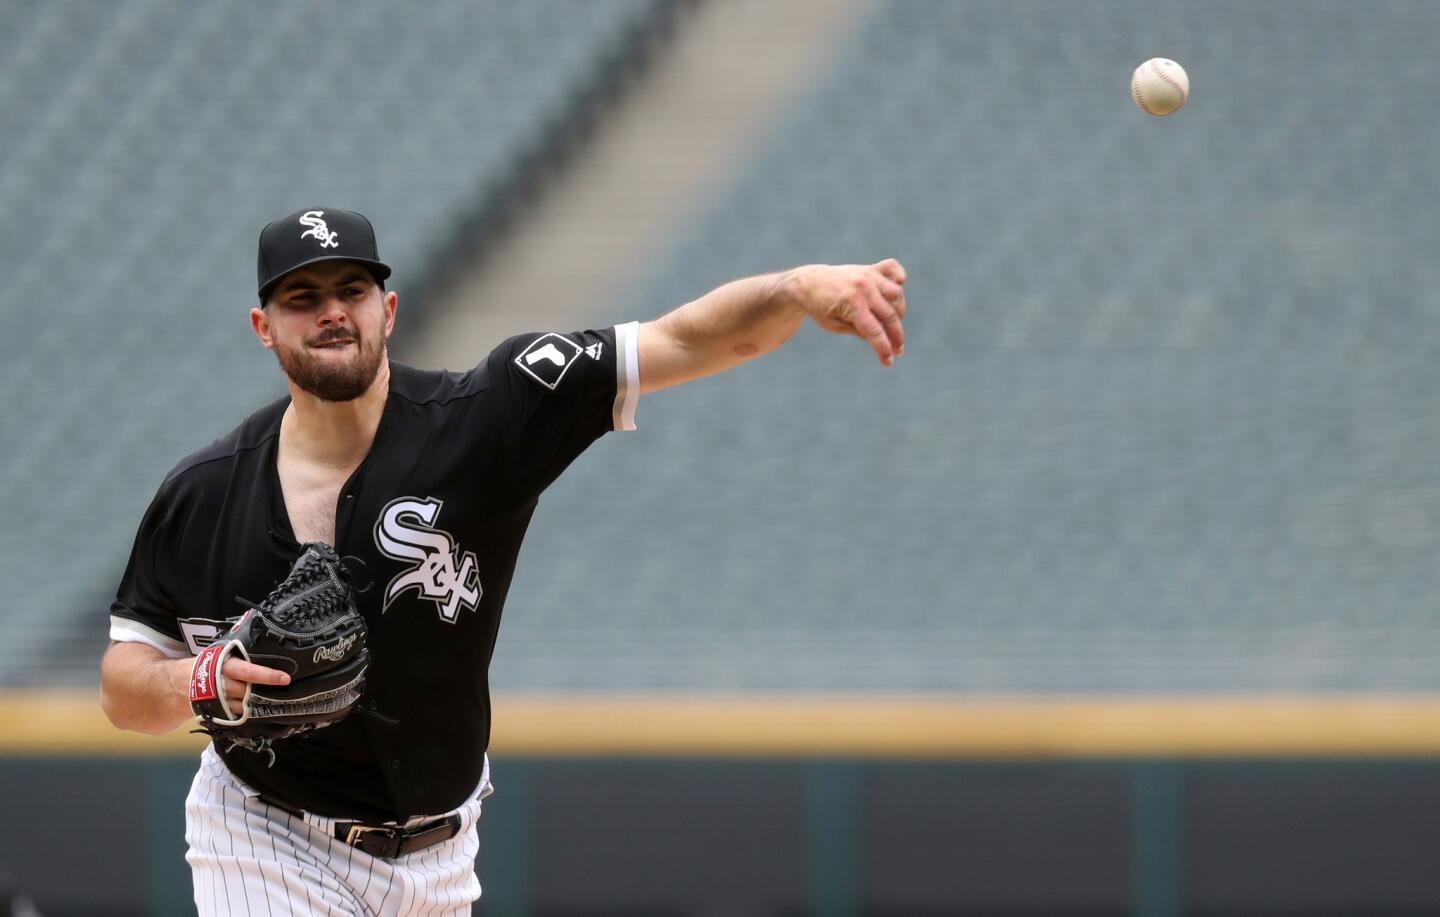 White Sox starting pitcher Carlos Rodon delivers to the plate against the Orioles in the first inning of the first game of a doubleheader on May 1, 2019, at Guaranteed Rate Field.